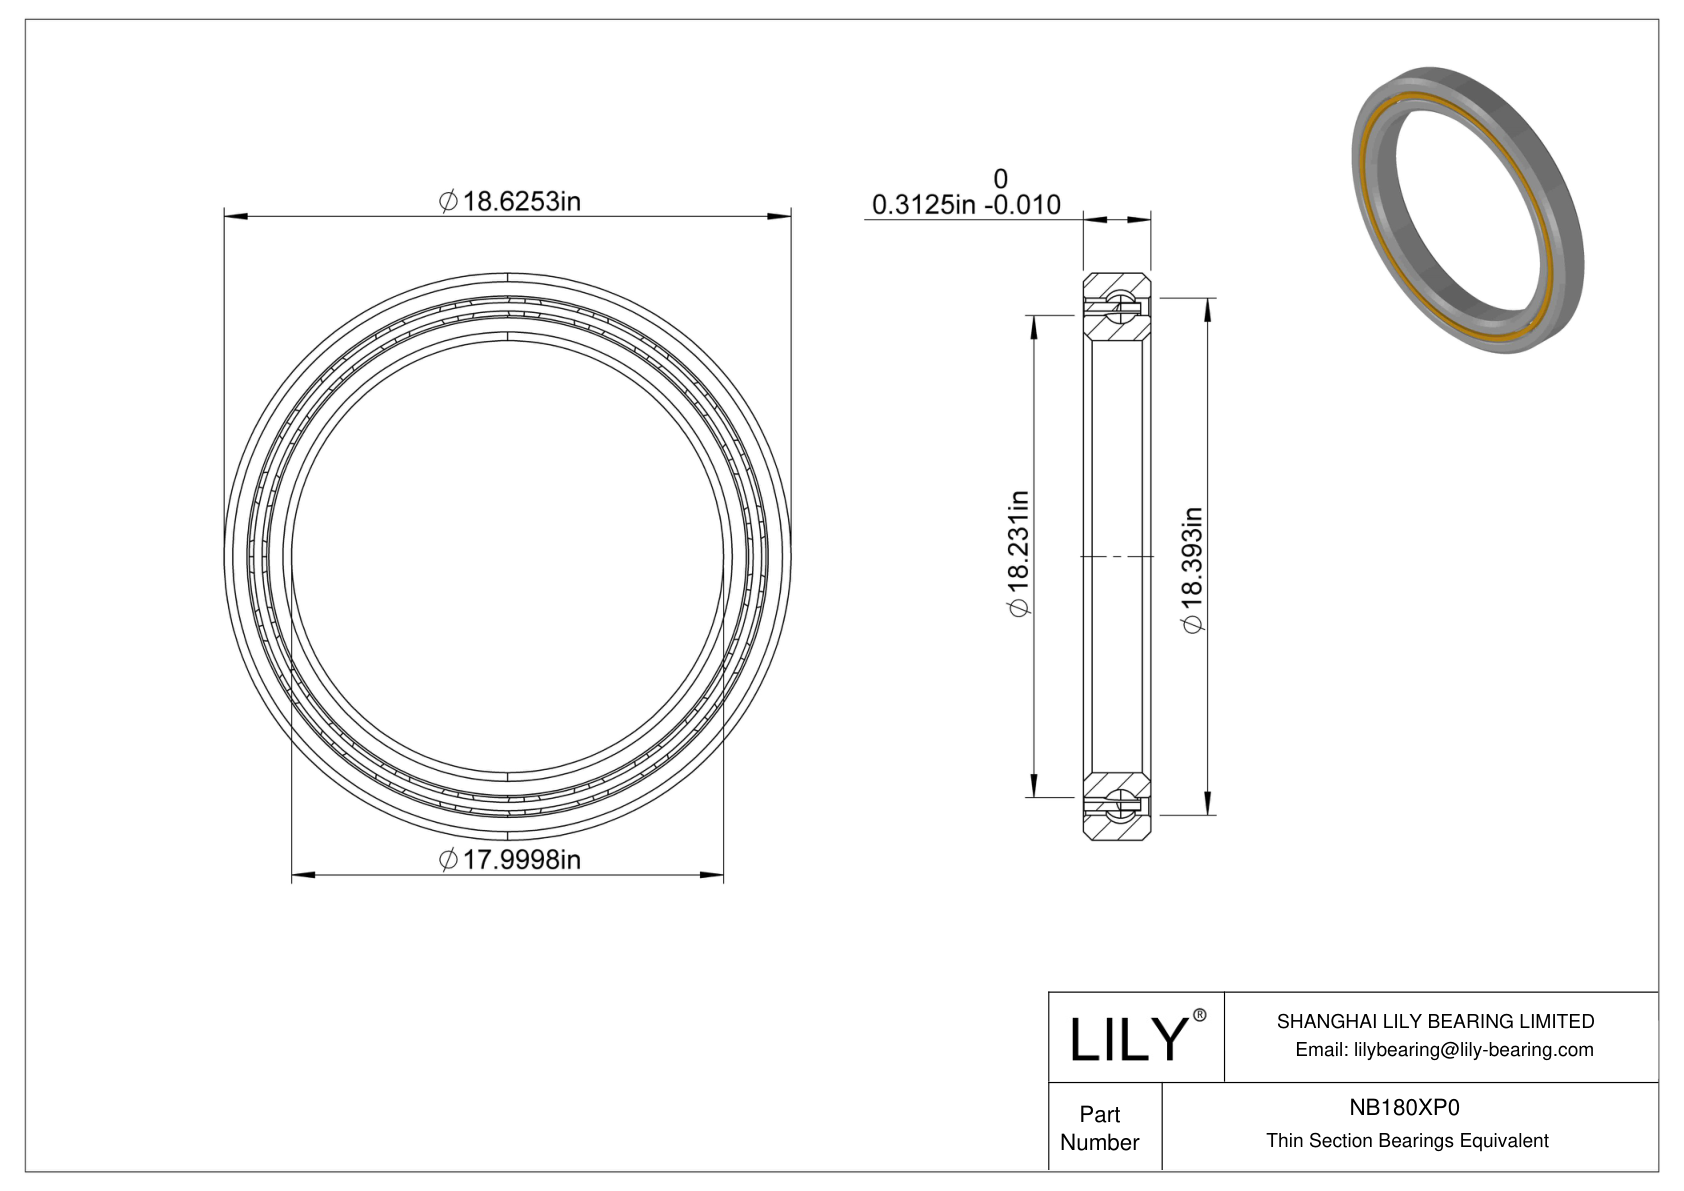 NB180XP0 Constant Section (CS) Bearings cad drawing